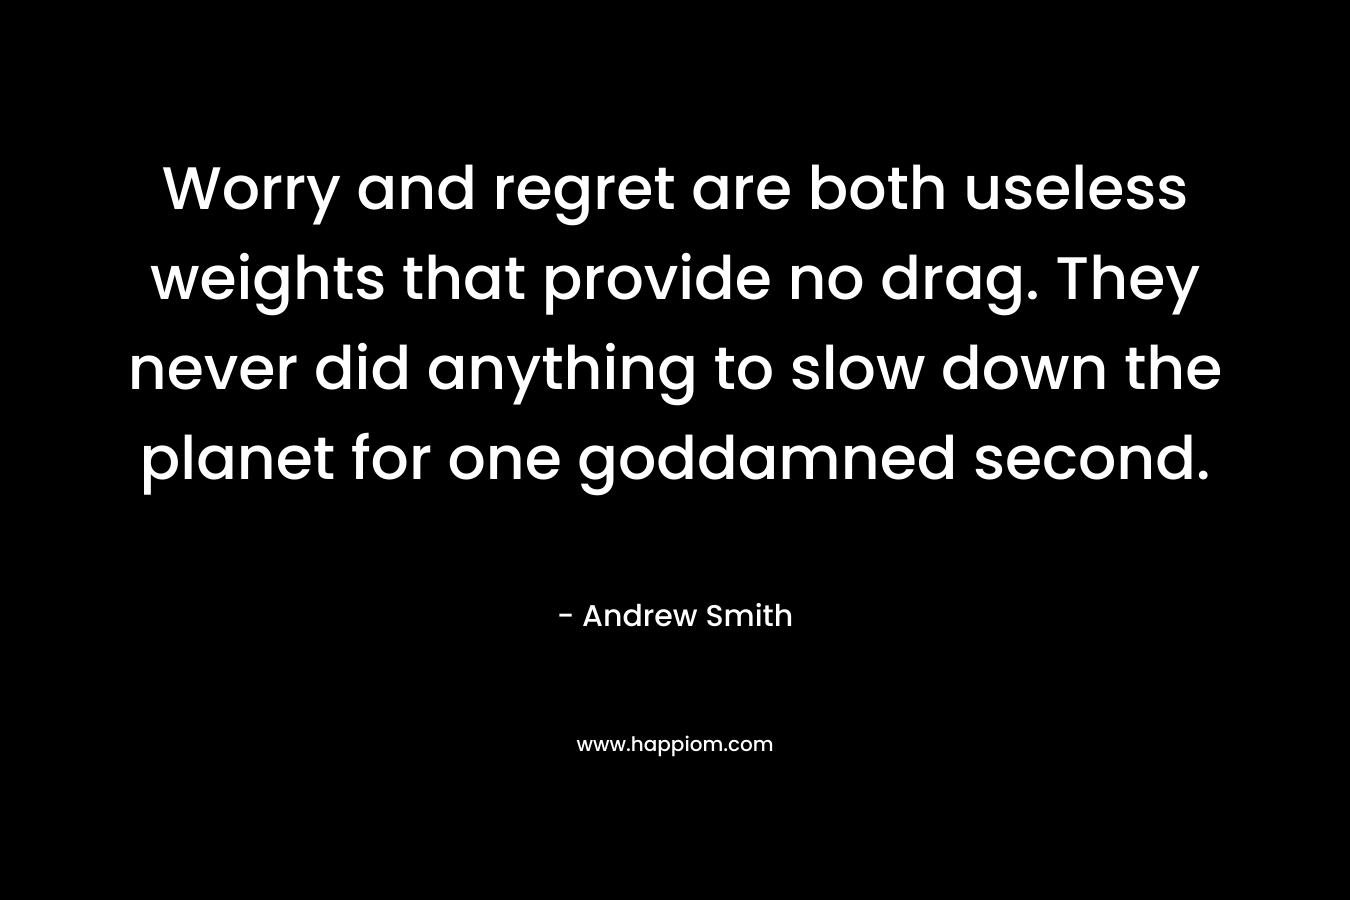 Worry and regret are both useless weights that provide no drag. They never did anything to slow down the planet for one goddamned second. – Andrew  Smith